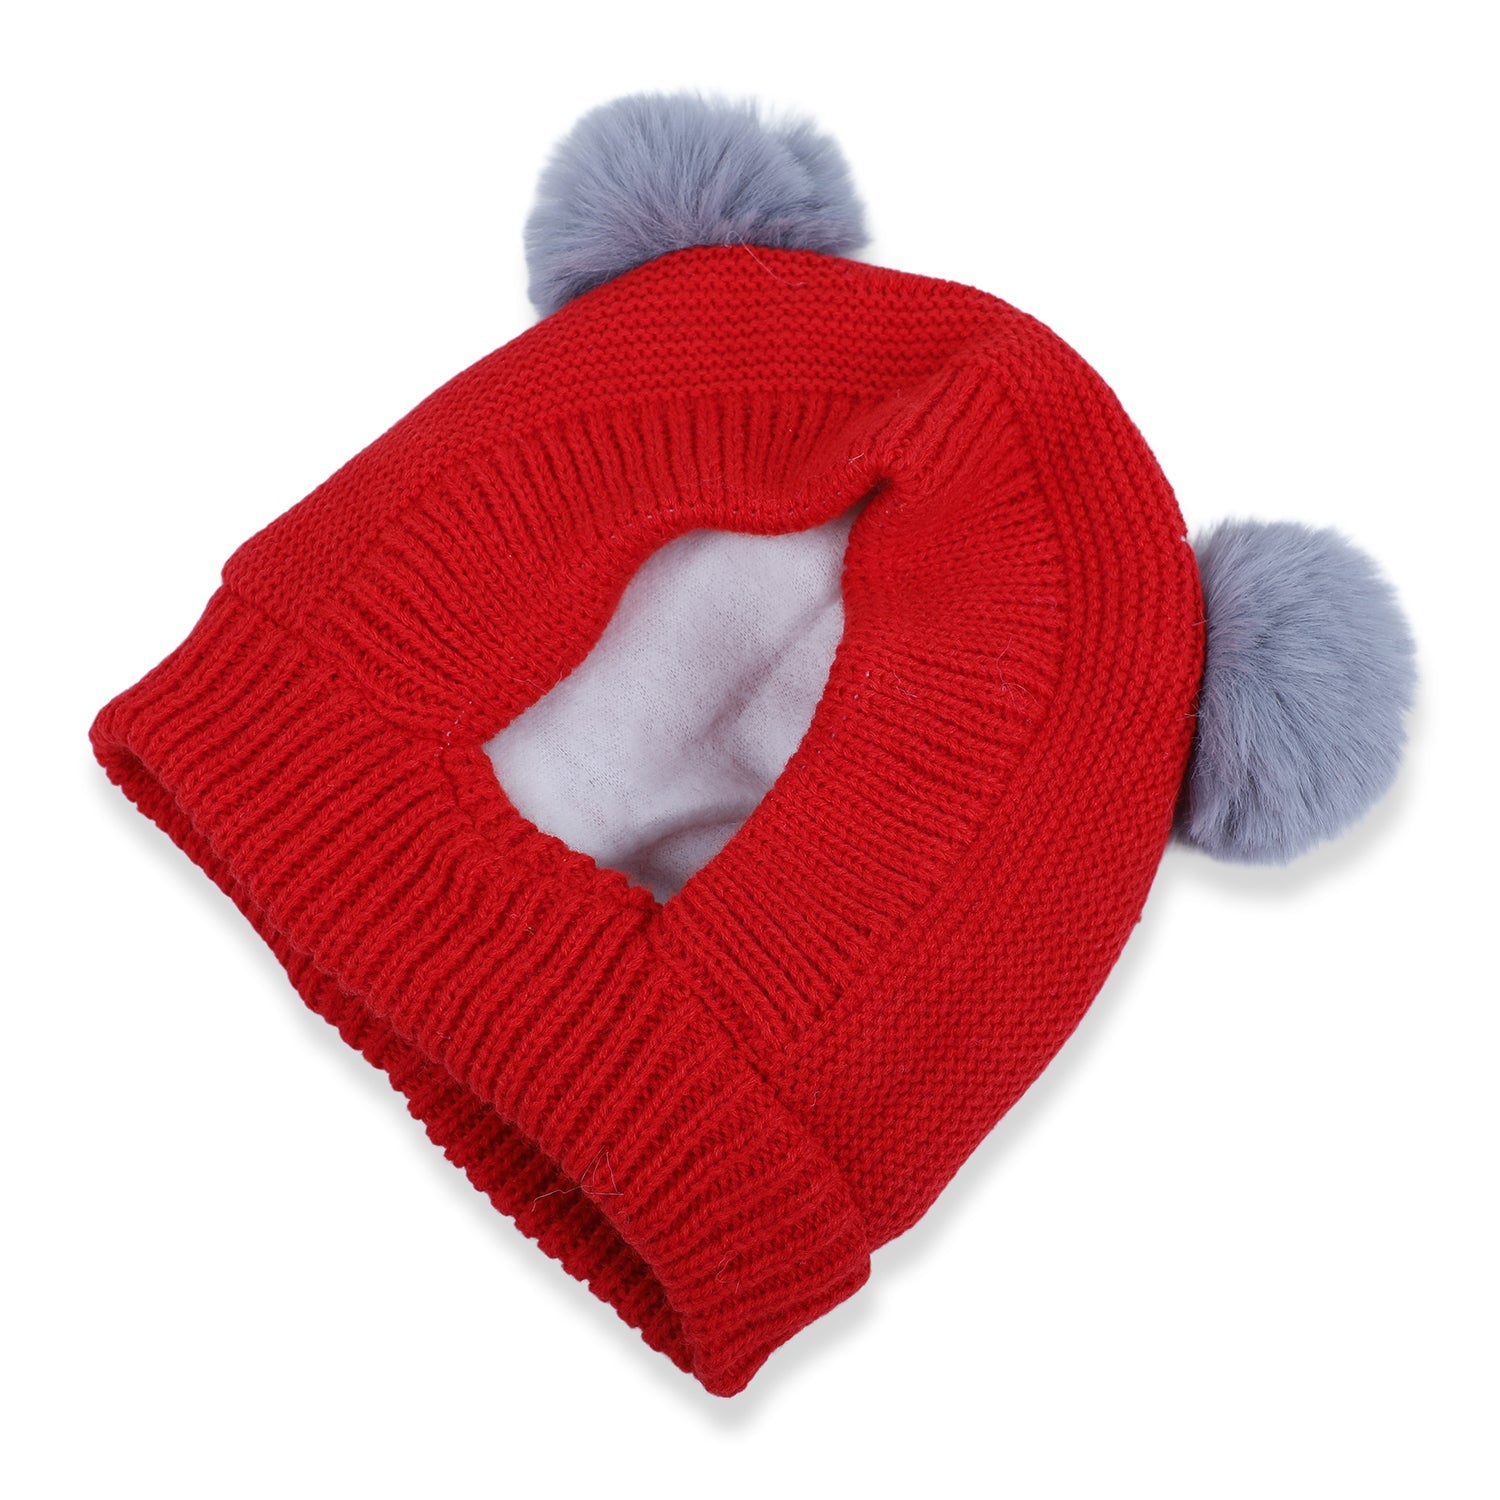 Baby Moo Adorable Pom Pom Knitted Beanie Woollen Cap - Red - Baby Moo